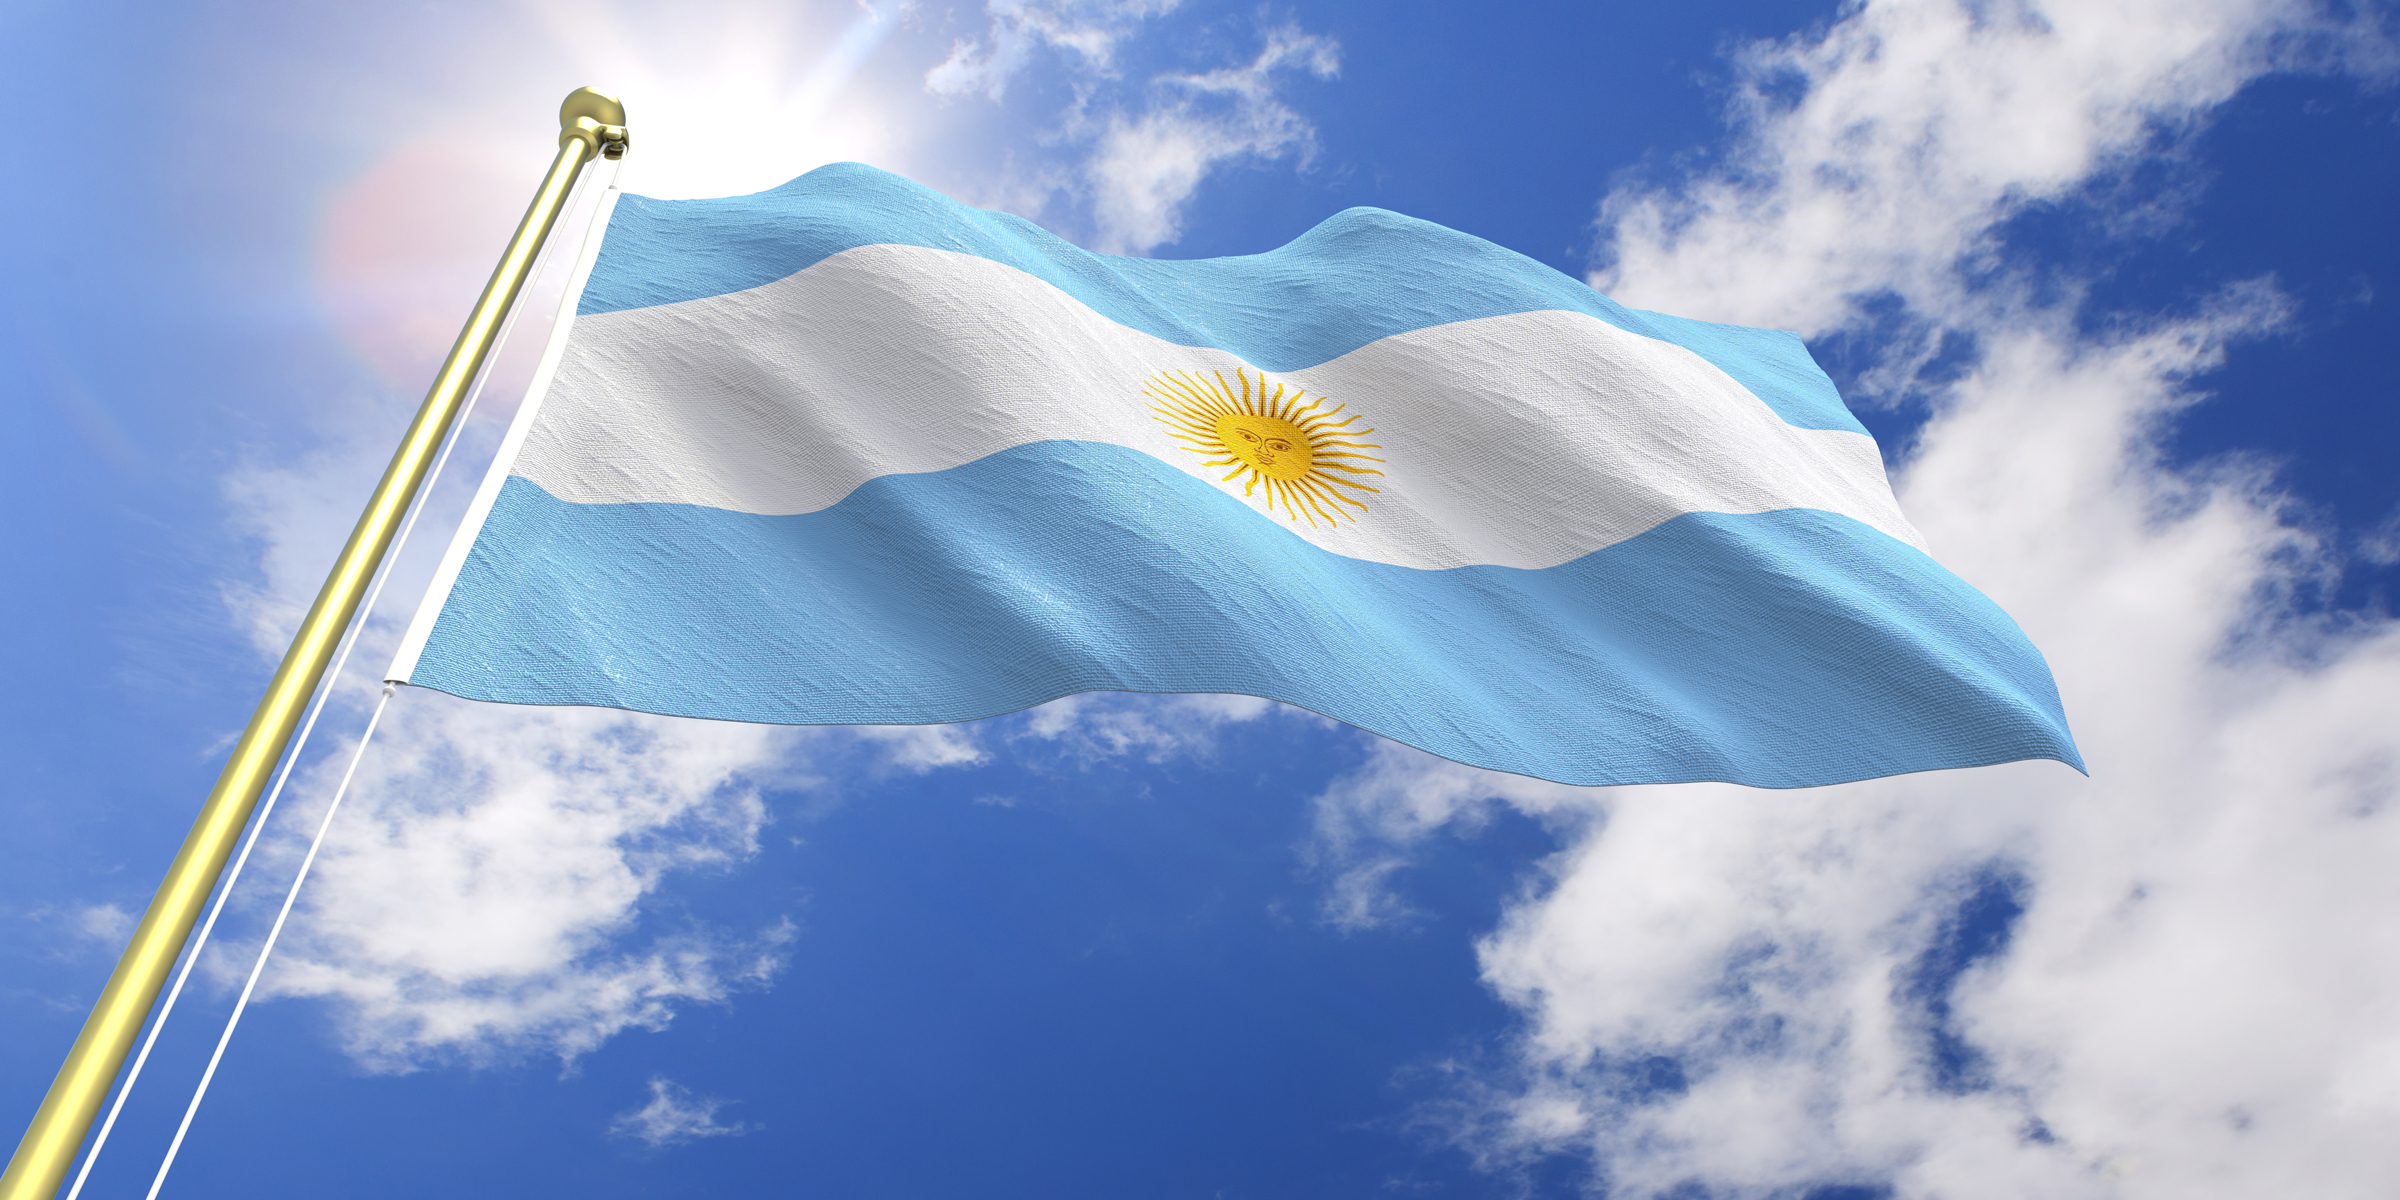 The Argentine flag | Source: Getty Images